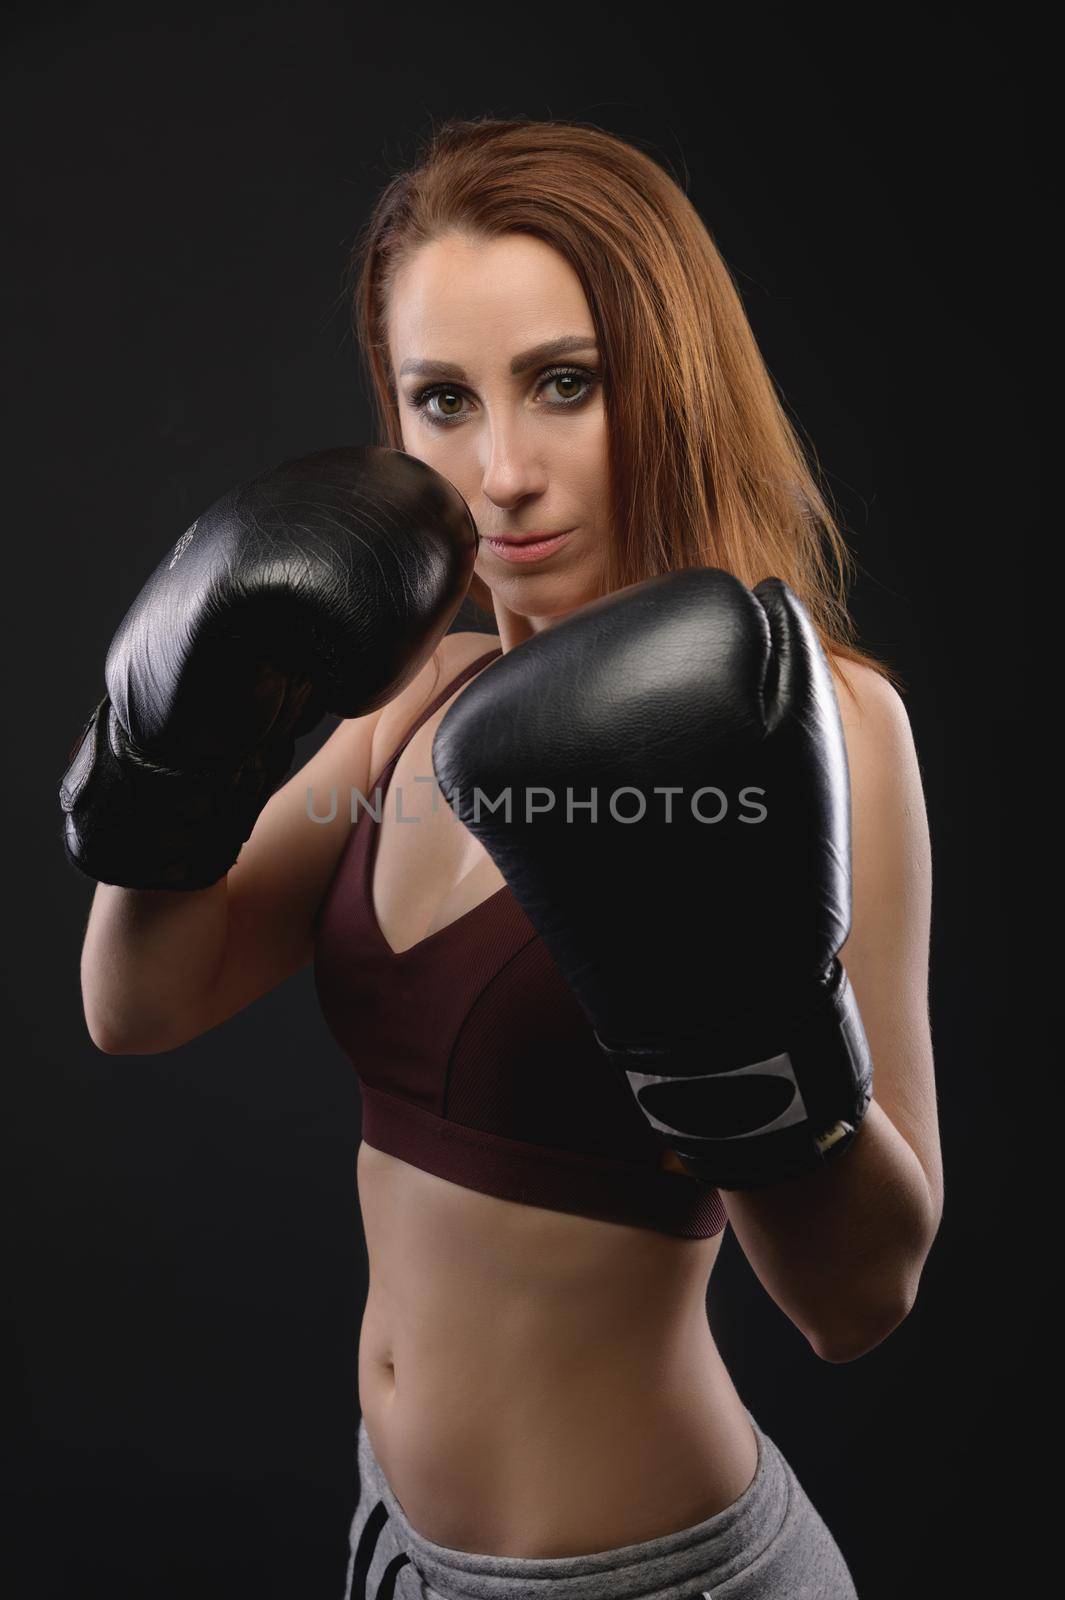 Strong and strict caucasian woman fighter in sportswear and boxing gloves on a black background. Feminism and combat sports.